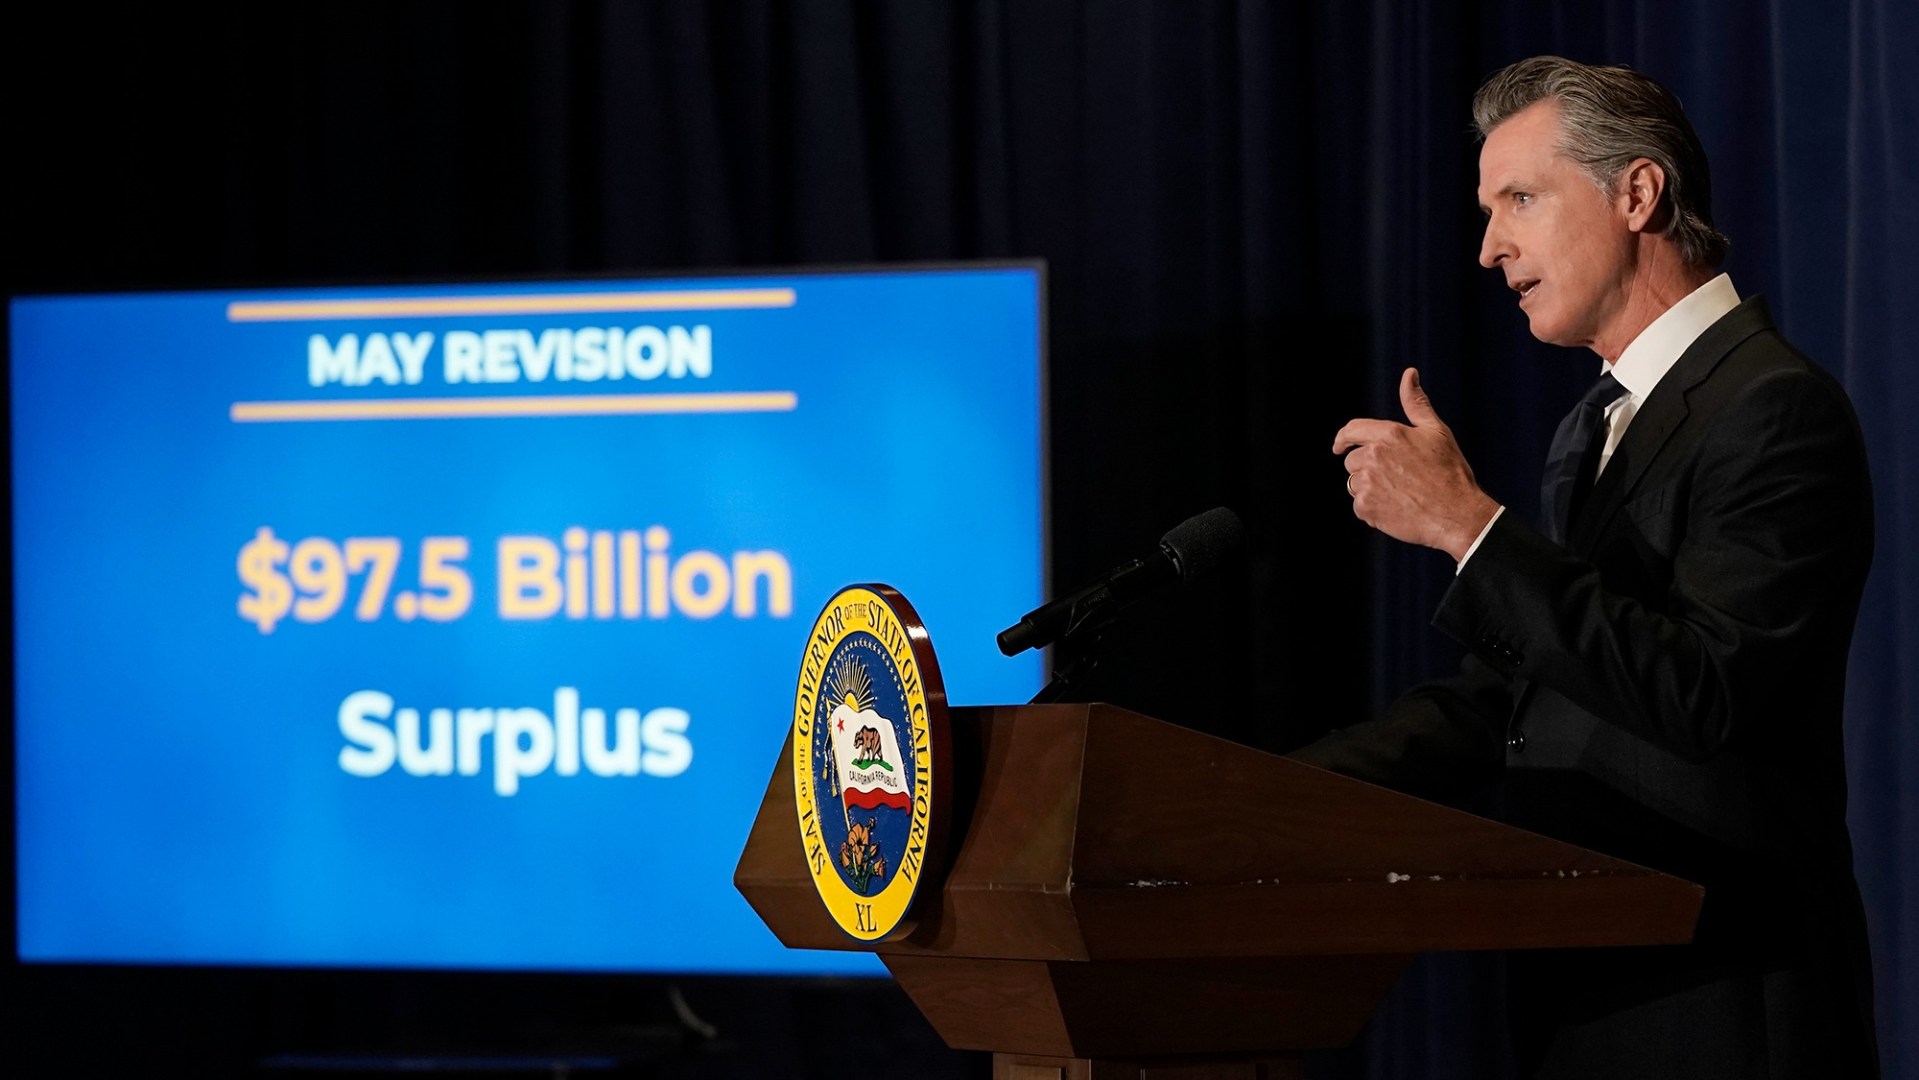 California Gov. Gavin Newsom unveils his 2022-2023 state budget revision during a news conference in Sacramento, Calif., Friday, May 13, 2022. California is expected have a record surplus. (AP Photo/Rich Pedroncelli,)